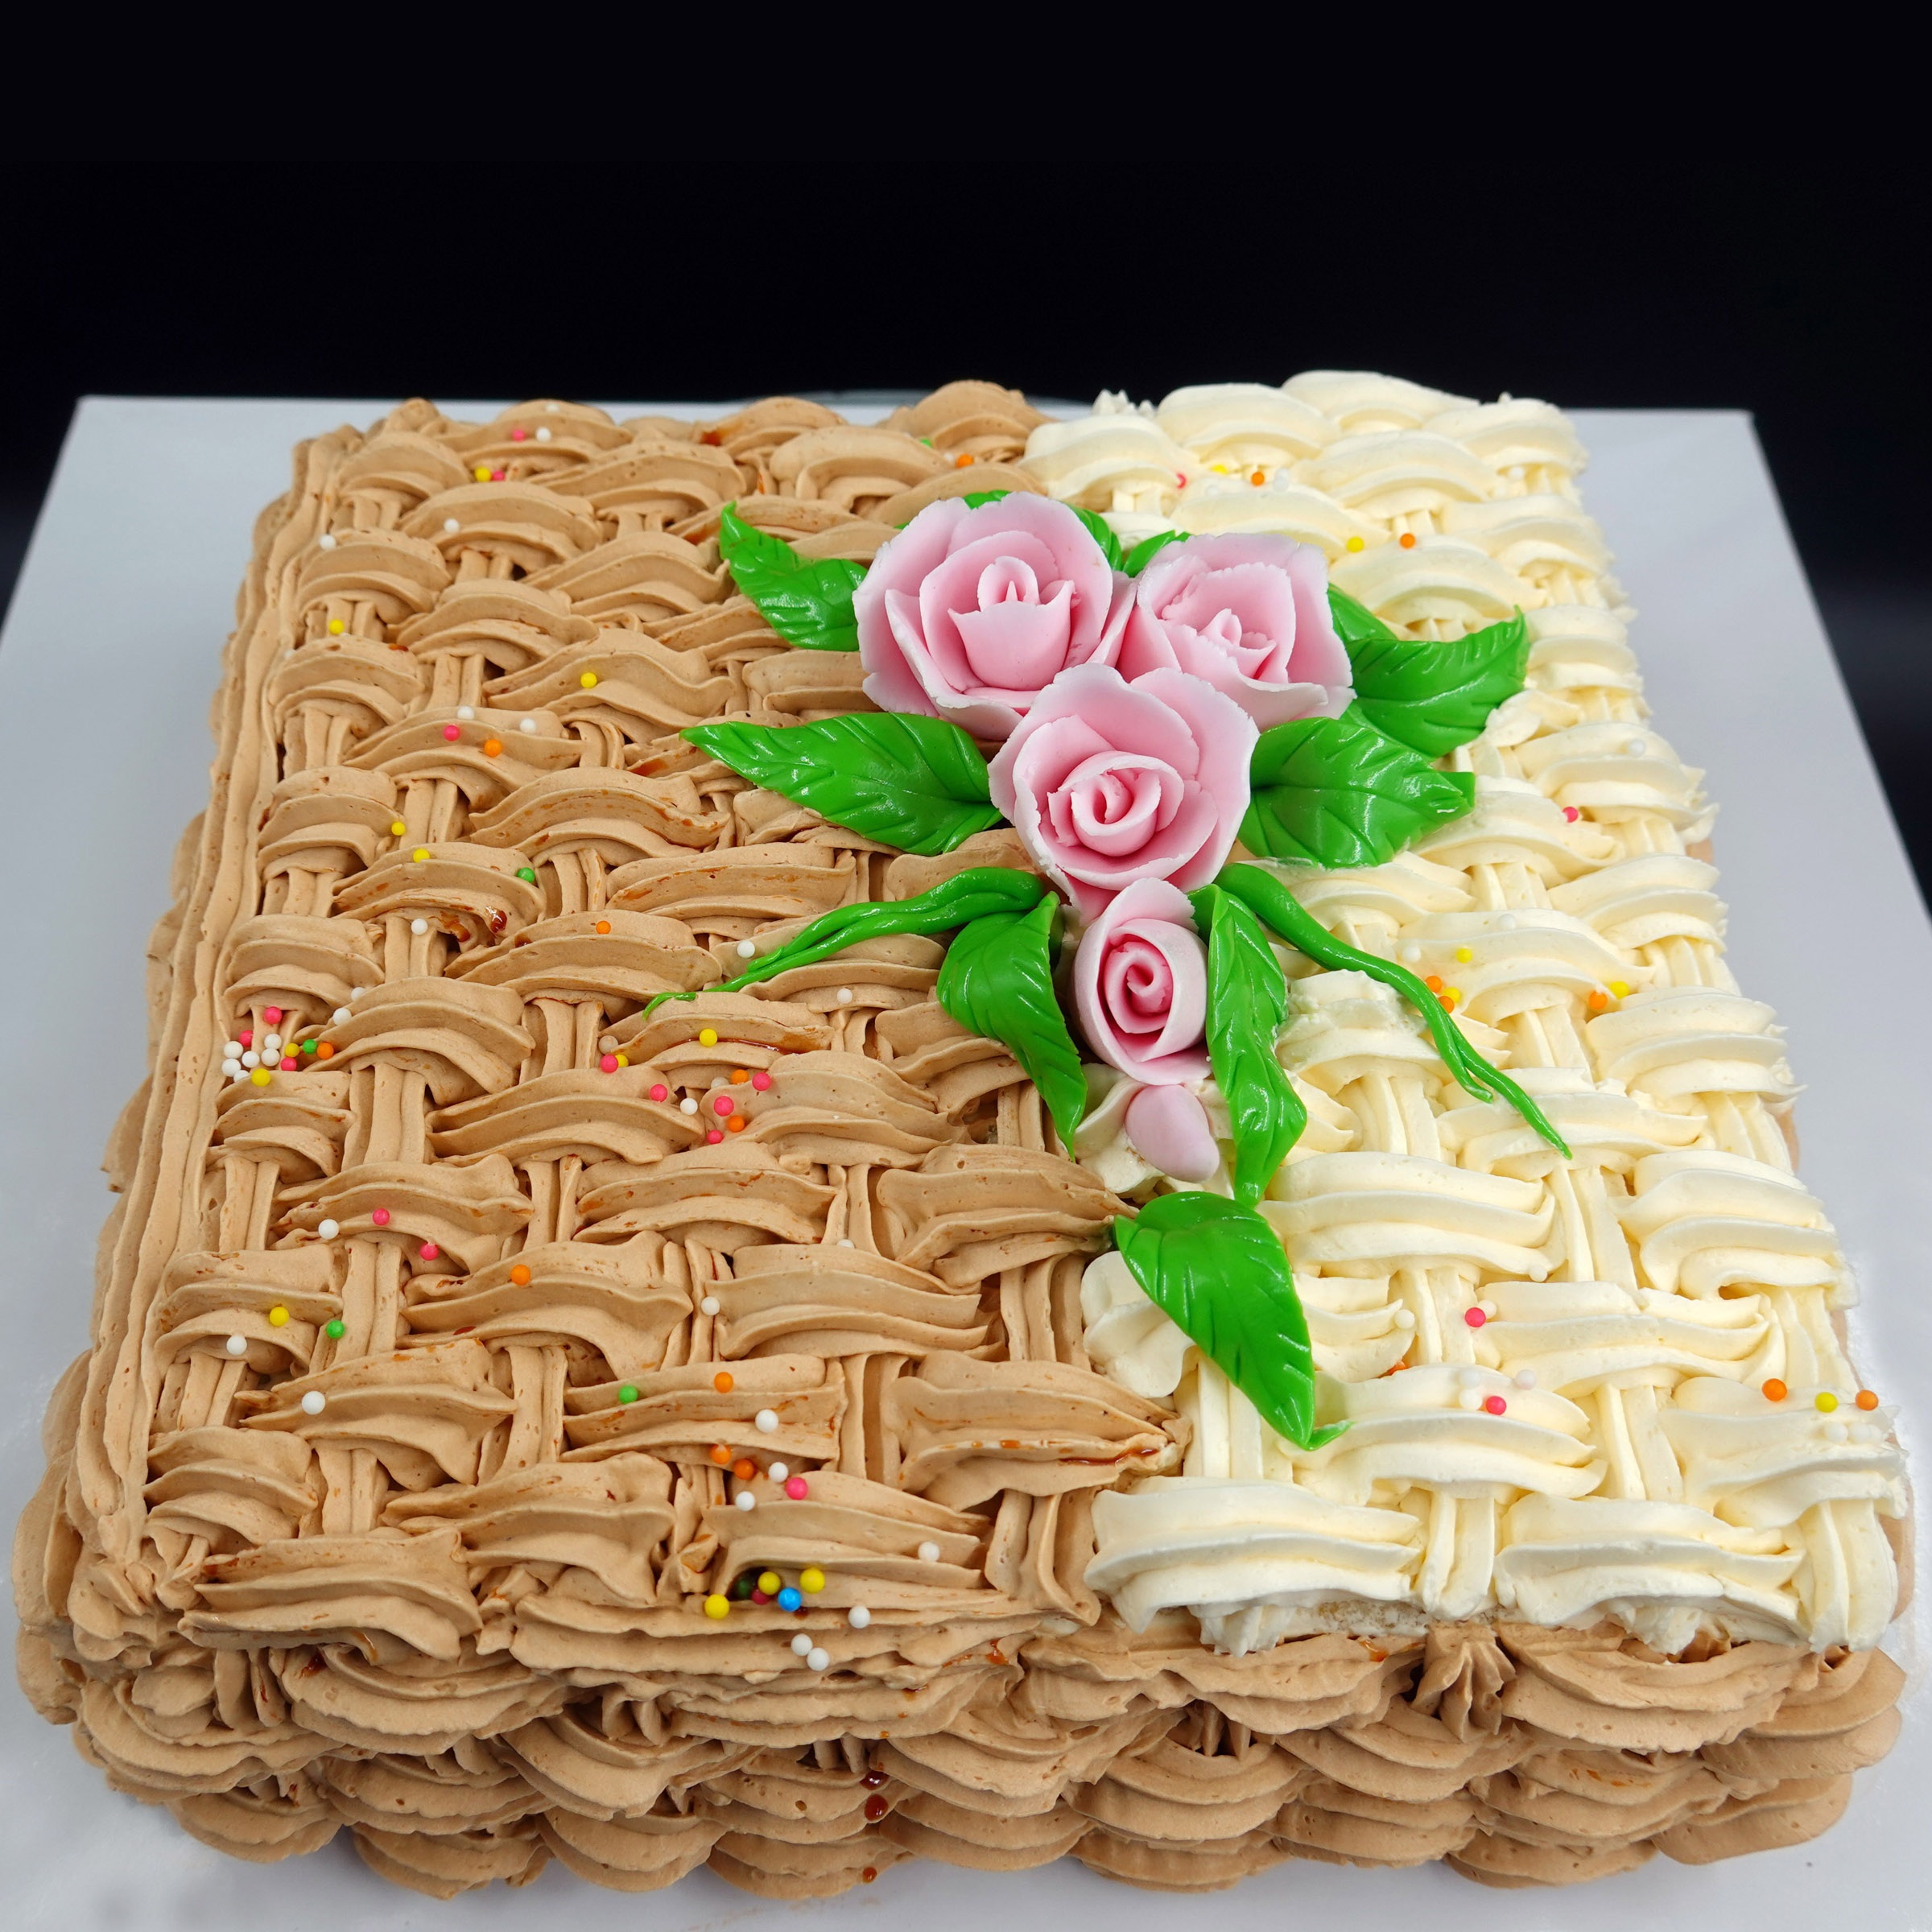 FLOWER BASKET | If you thought cakes couldn't get any prettier then you  haven't seen this one! | By MetDaan Cakes | You ready to make a pretty flower  basket cake? Because